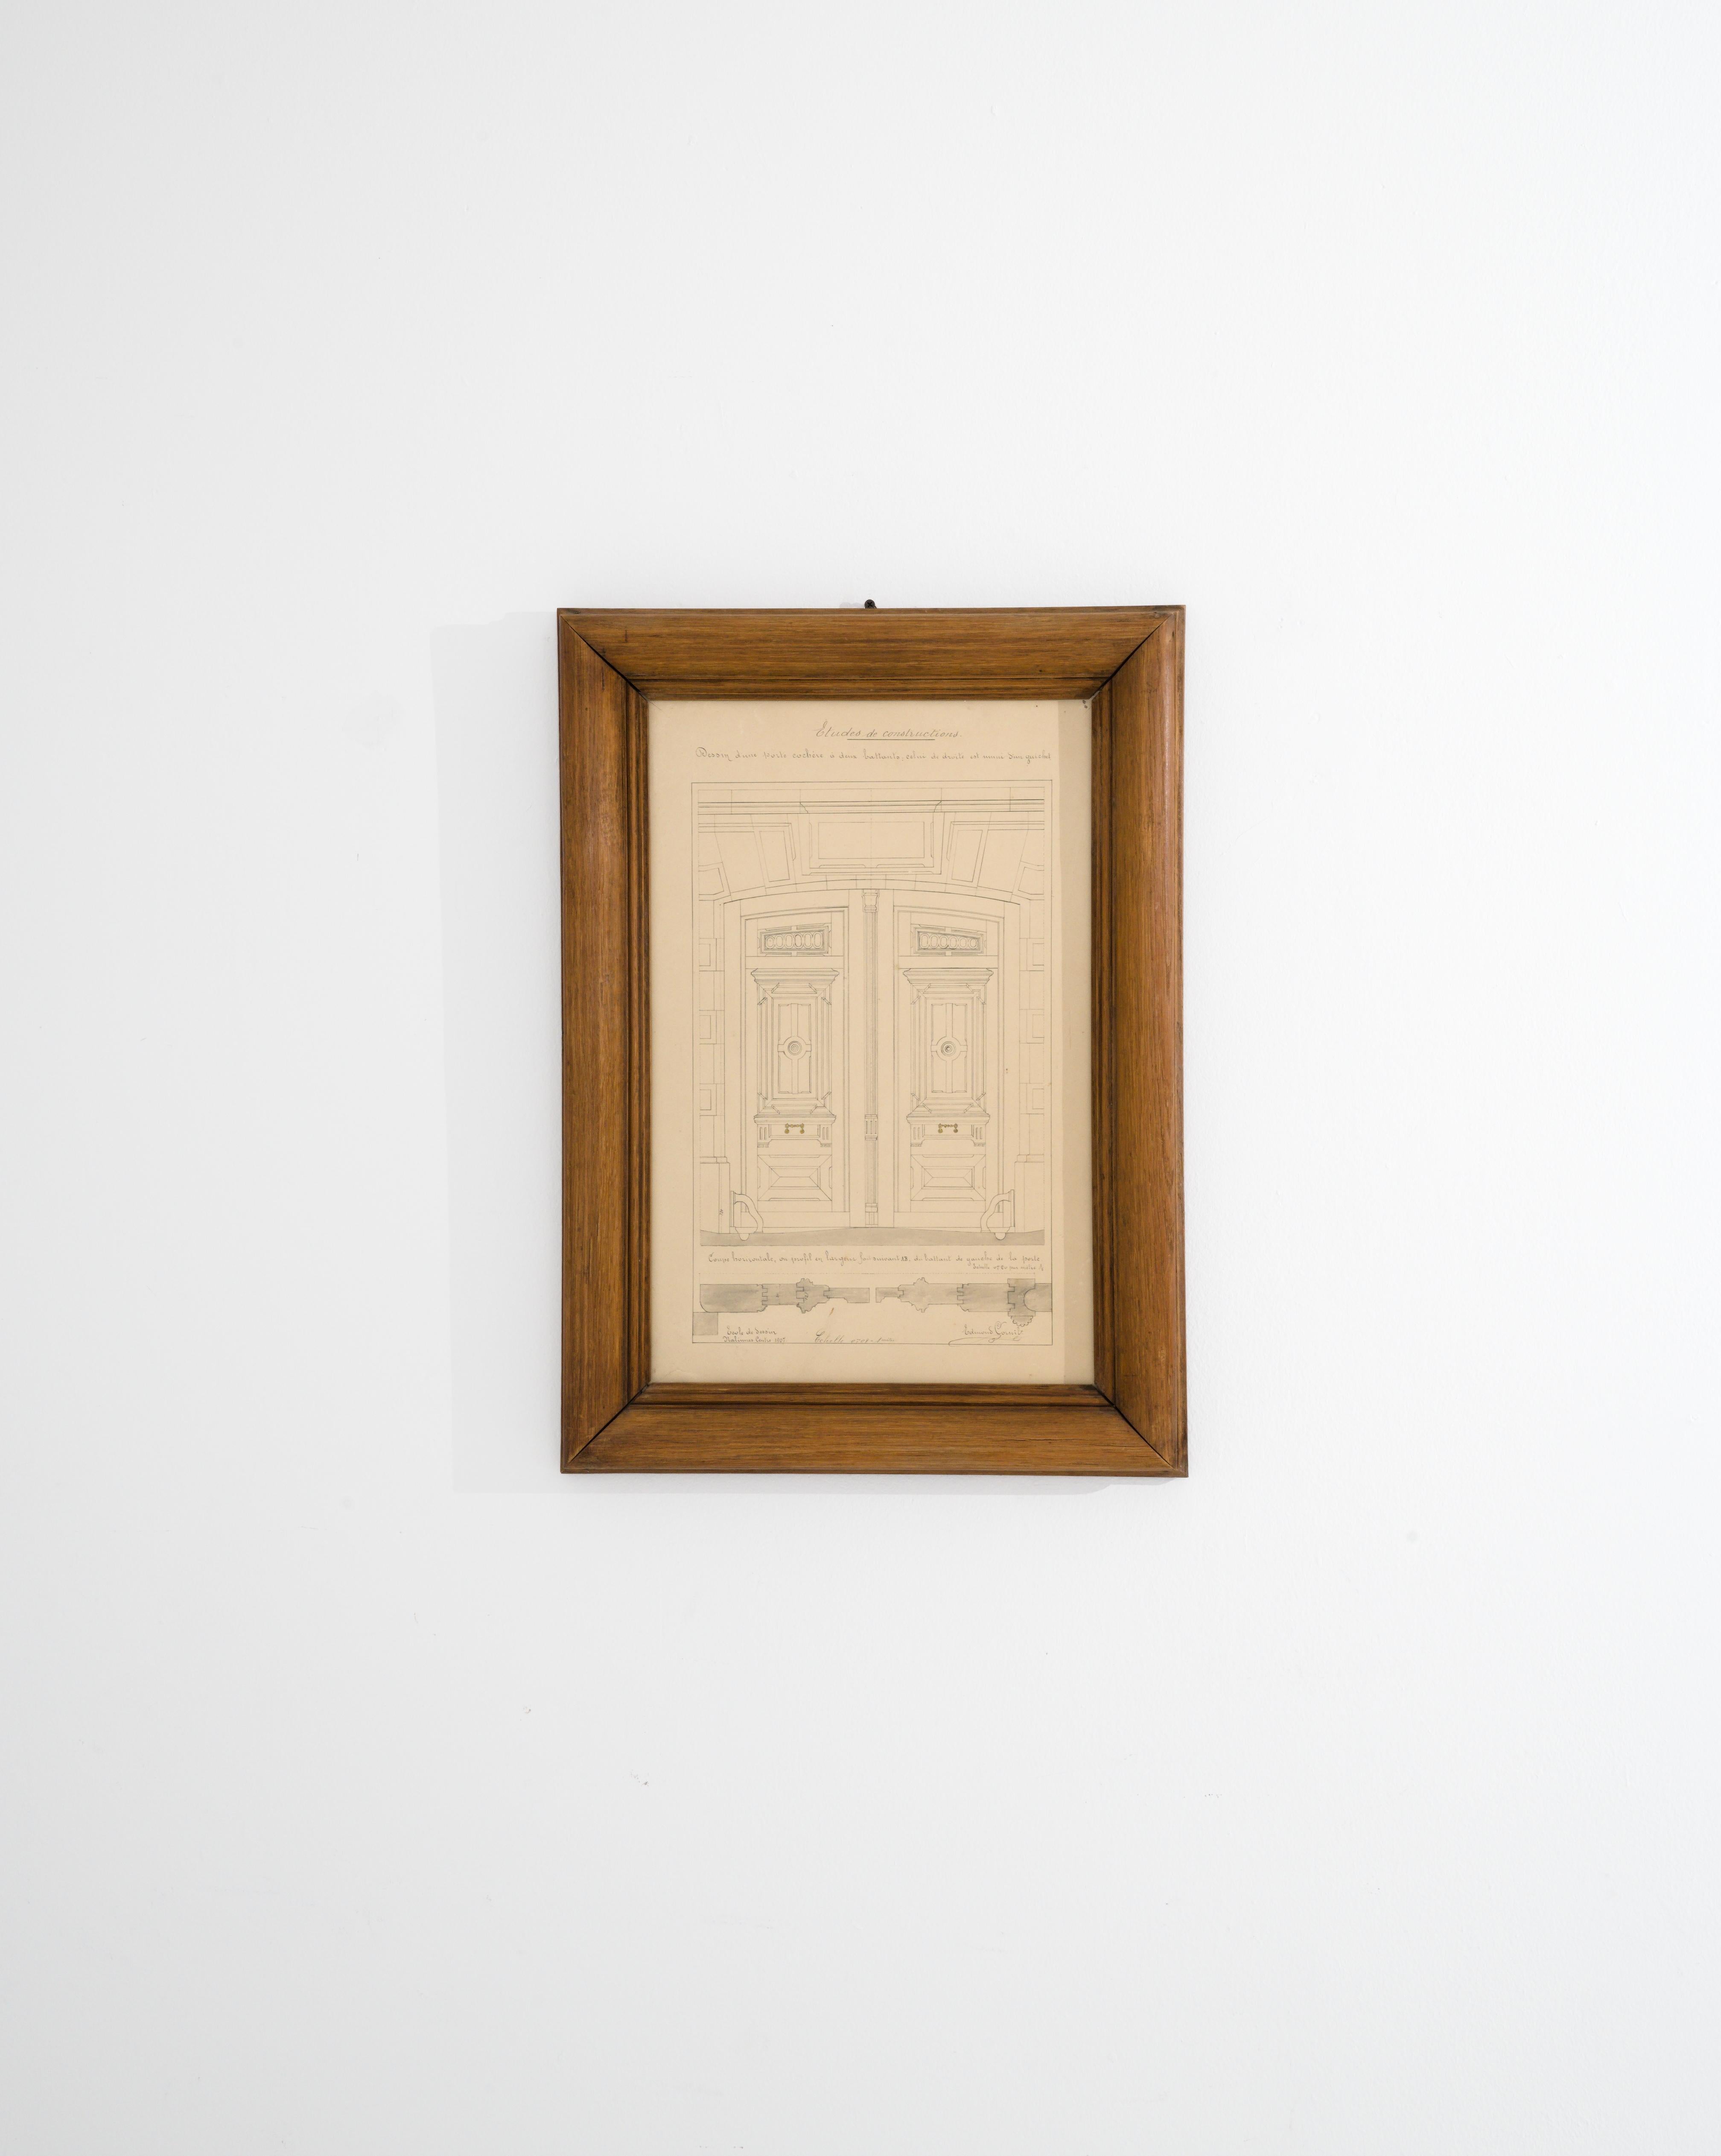 A drawing with a wooden frame made in France, circa 1900. This fascinating design depicts a set of two paneled doors, framed by a stone archway, that has been rendered scrupulously on paper. This simple, unassuming drawing conveys a sense of refined